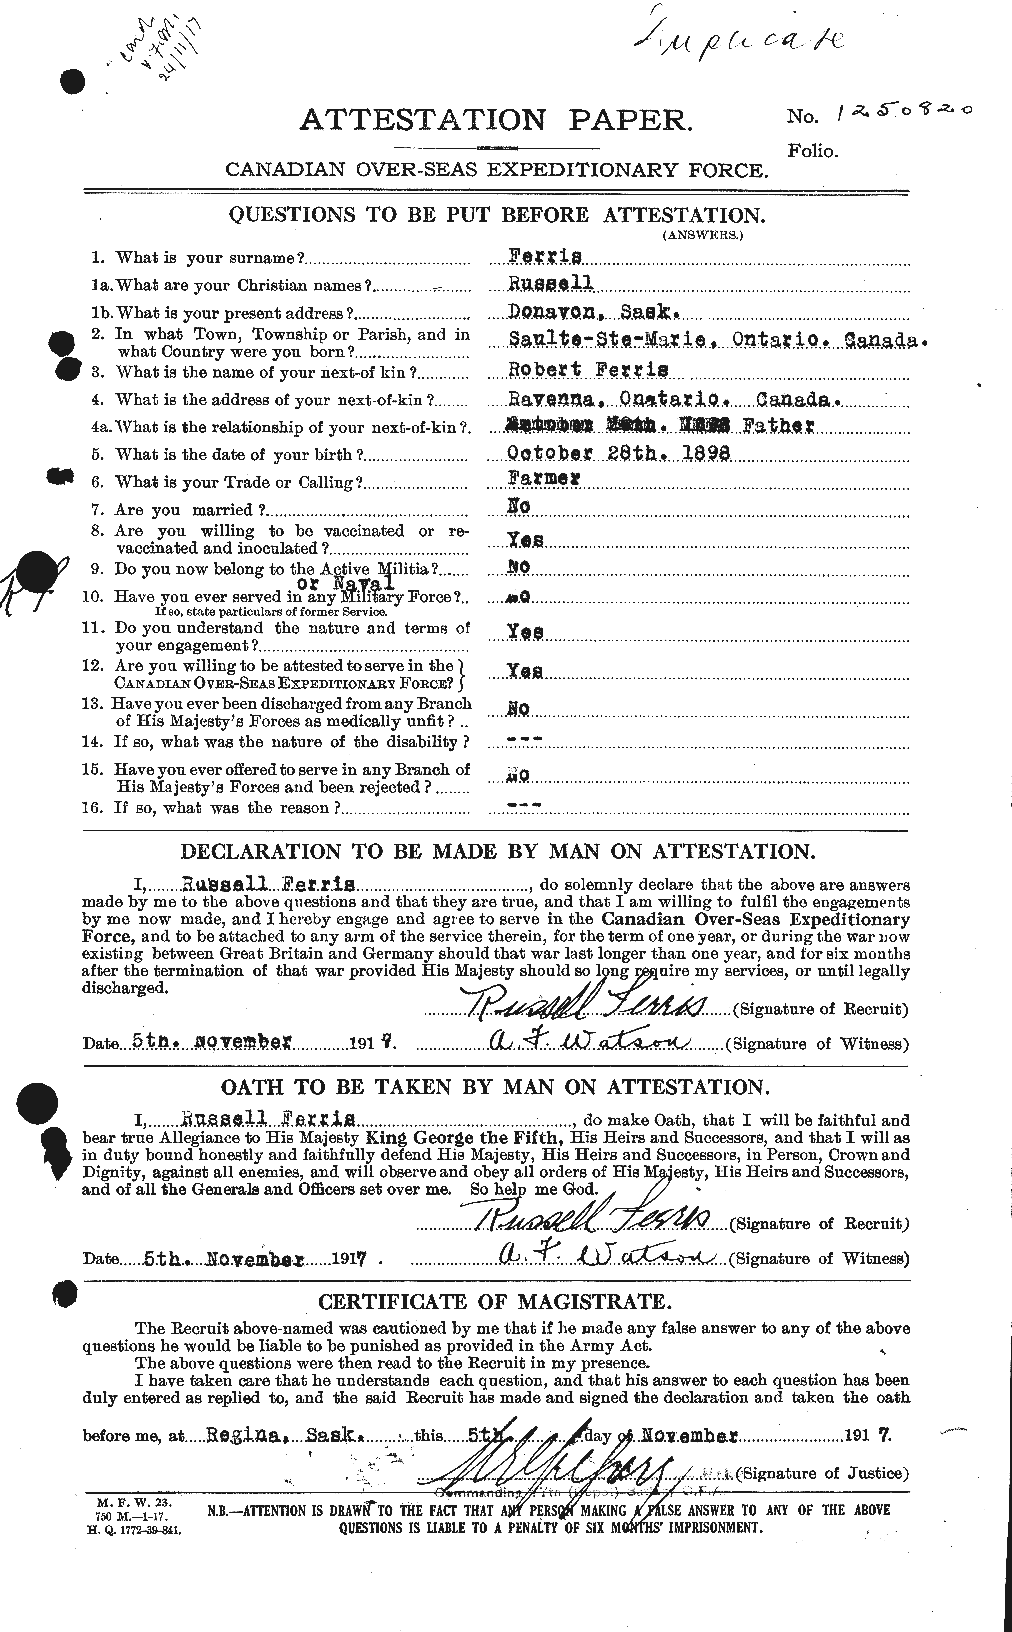 Personnel Records of the First World War - CEF 325763a